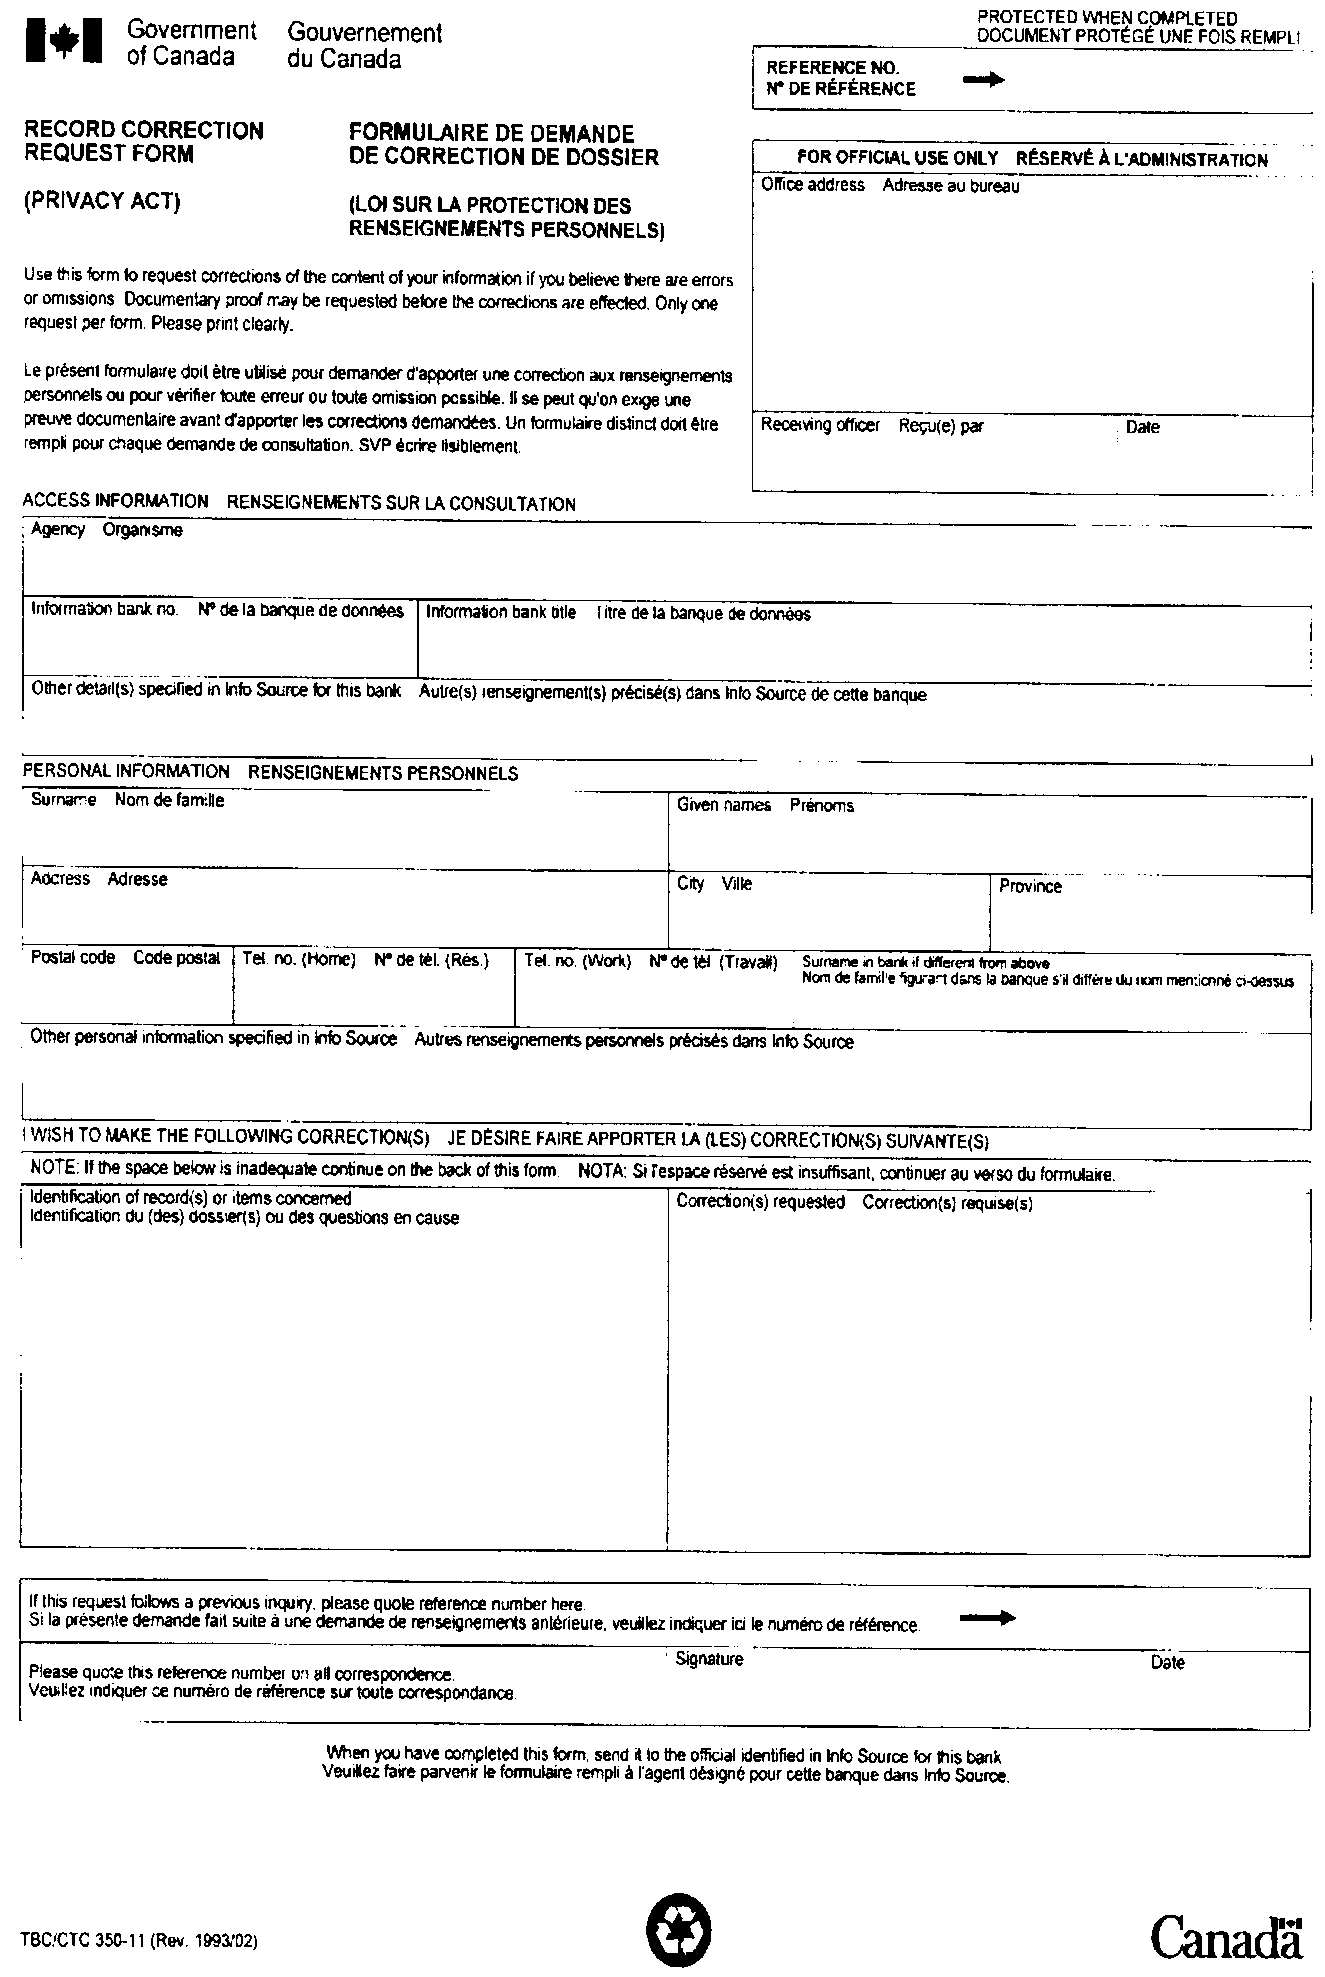 Correction Request Form